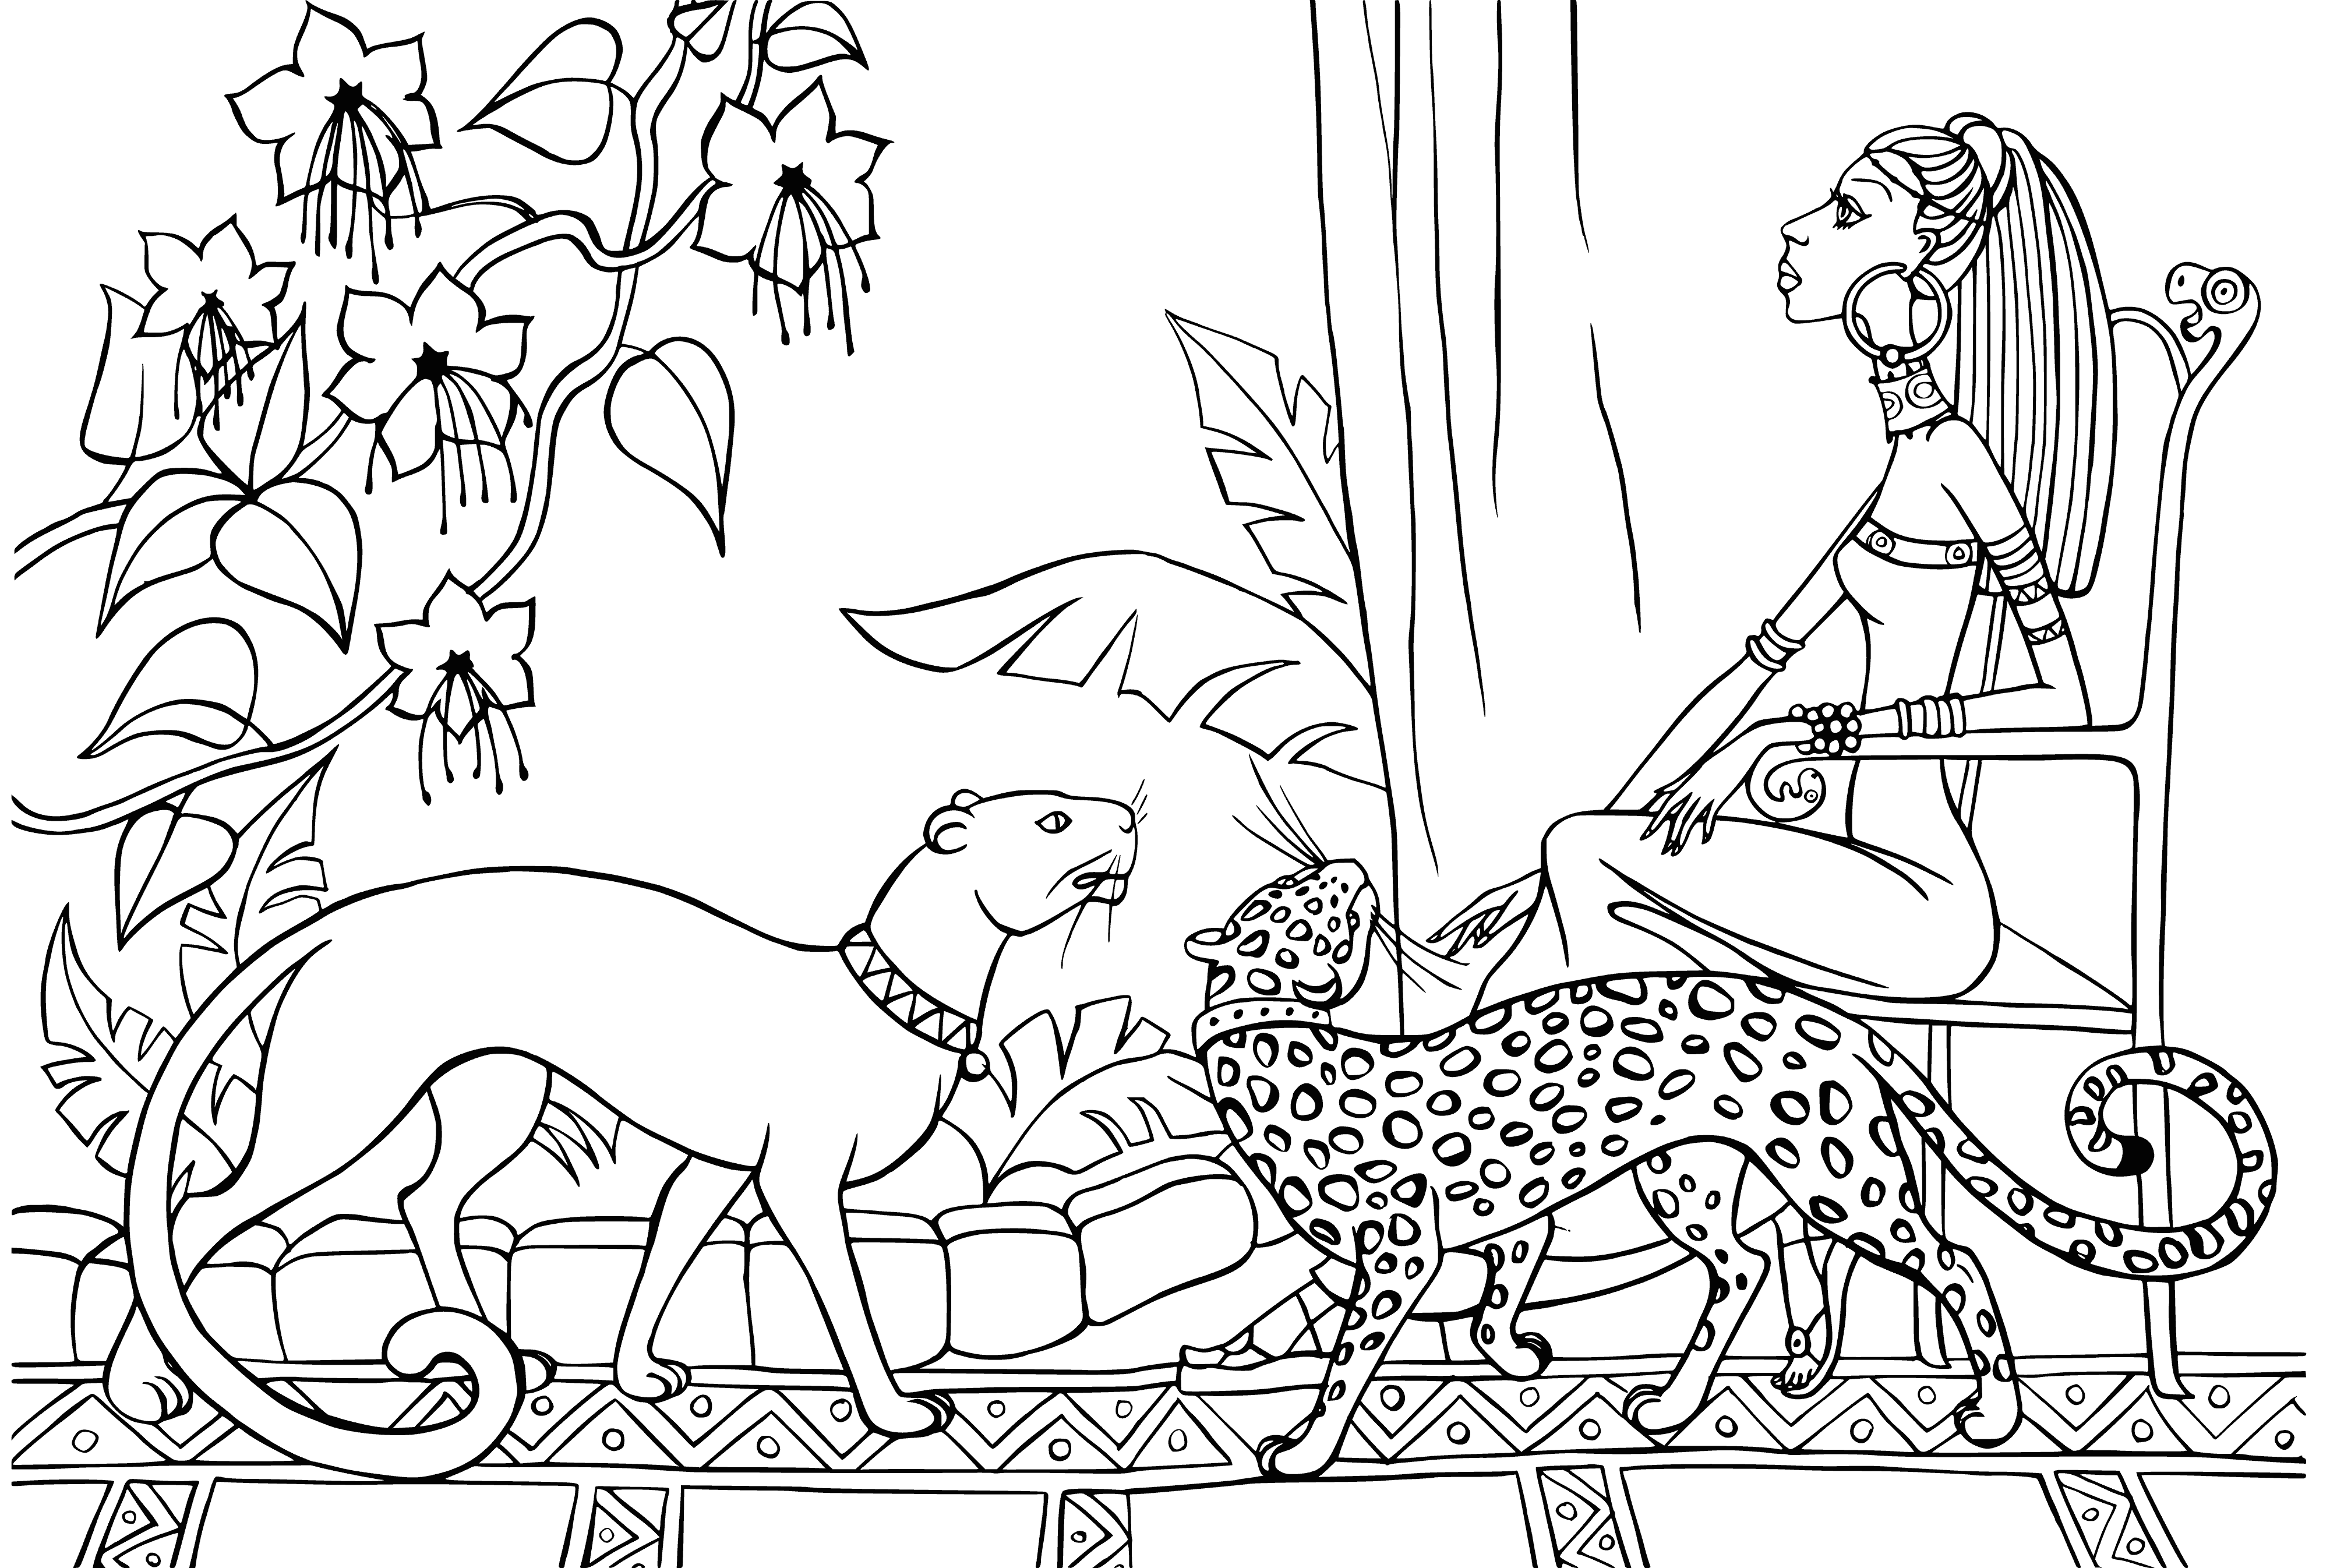 coloring page: A fairy kingdom with a pink, purple and light-purple dressed Egyptian princess, surrounded by fairies with pink, blue & purple wings and a castle in the background.